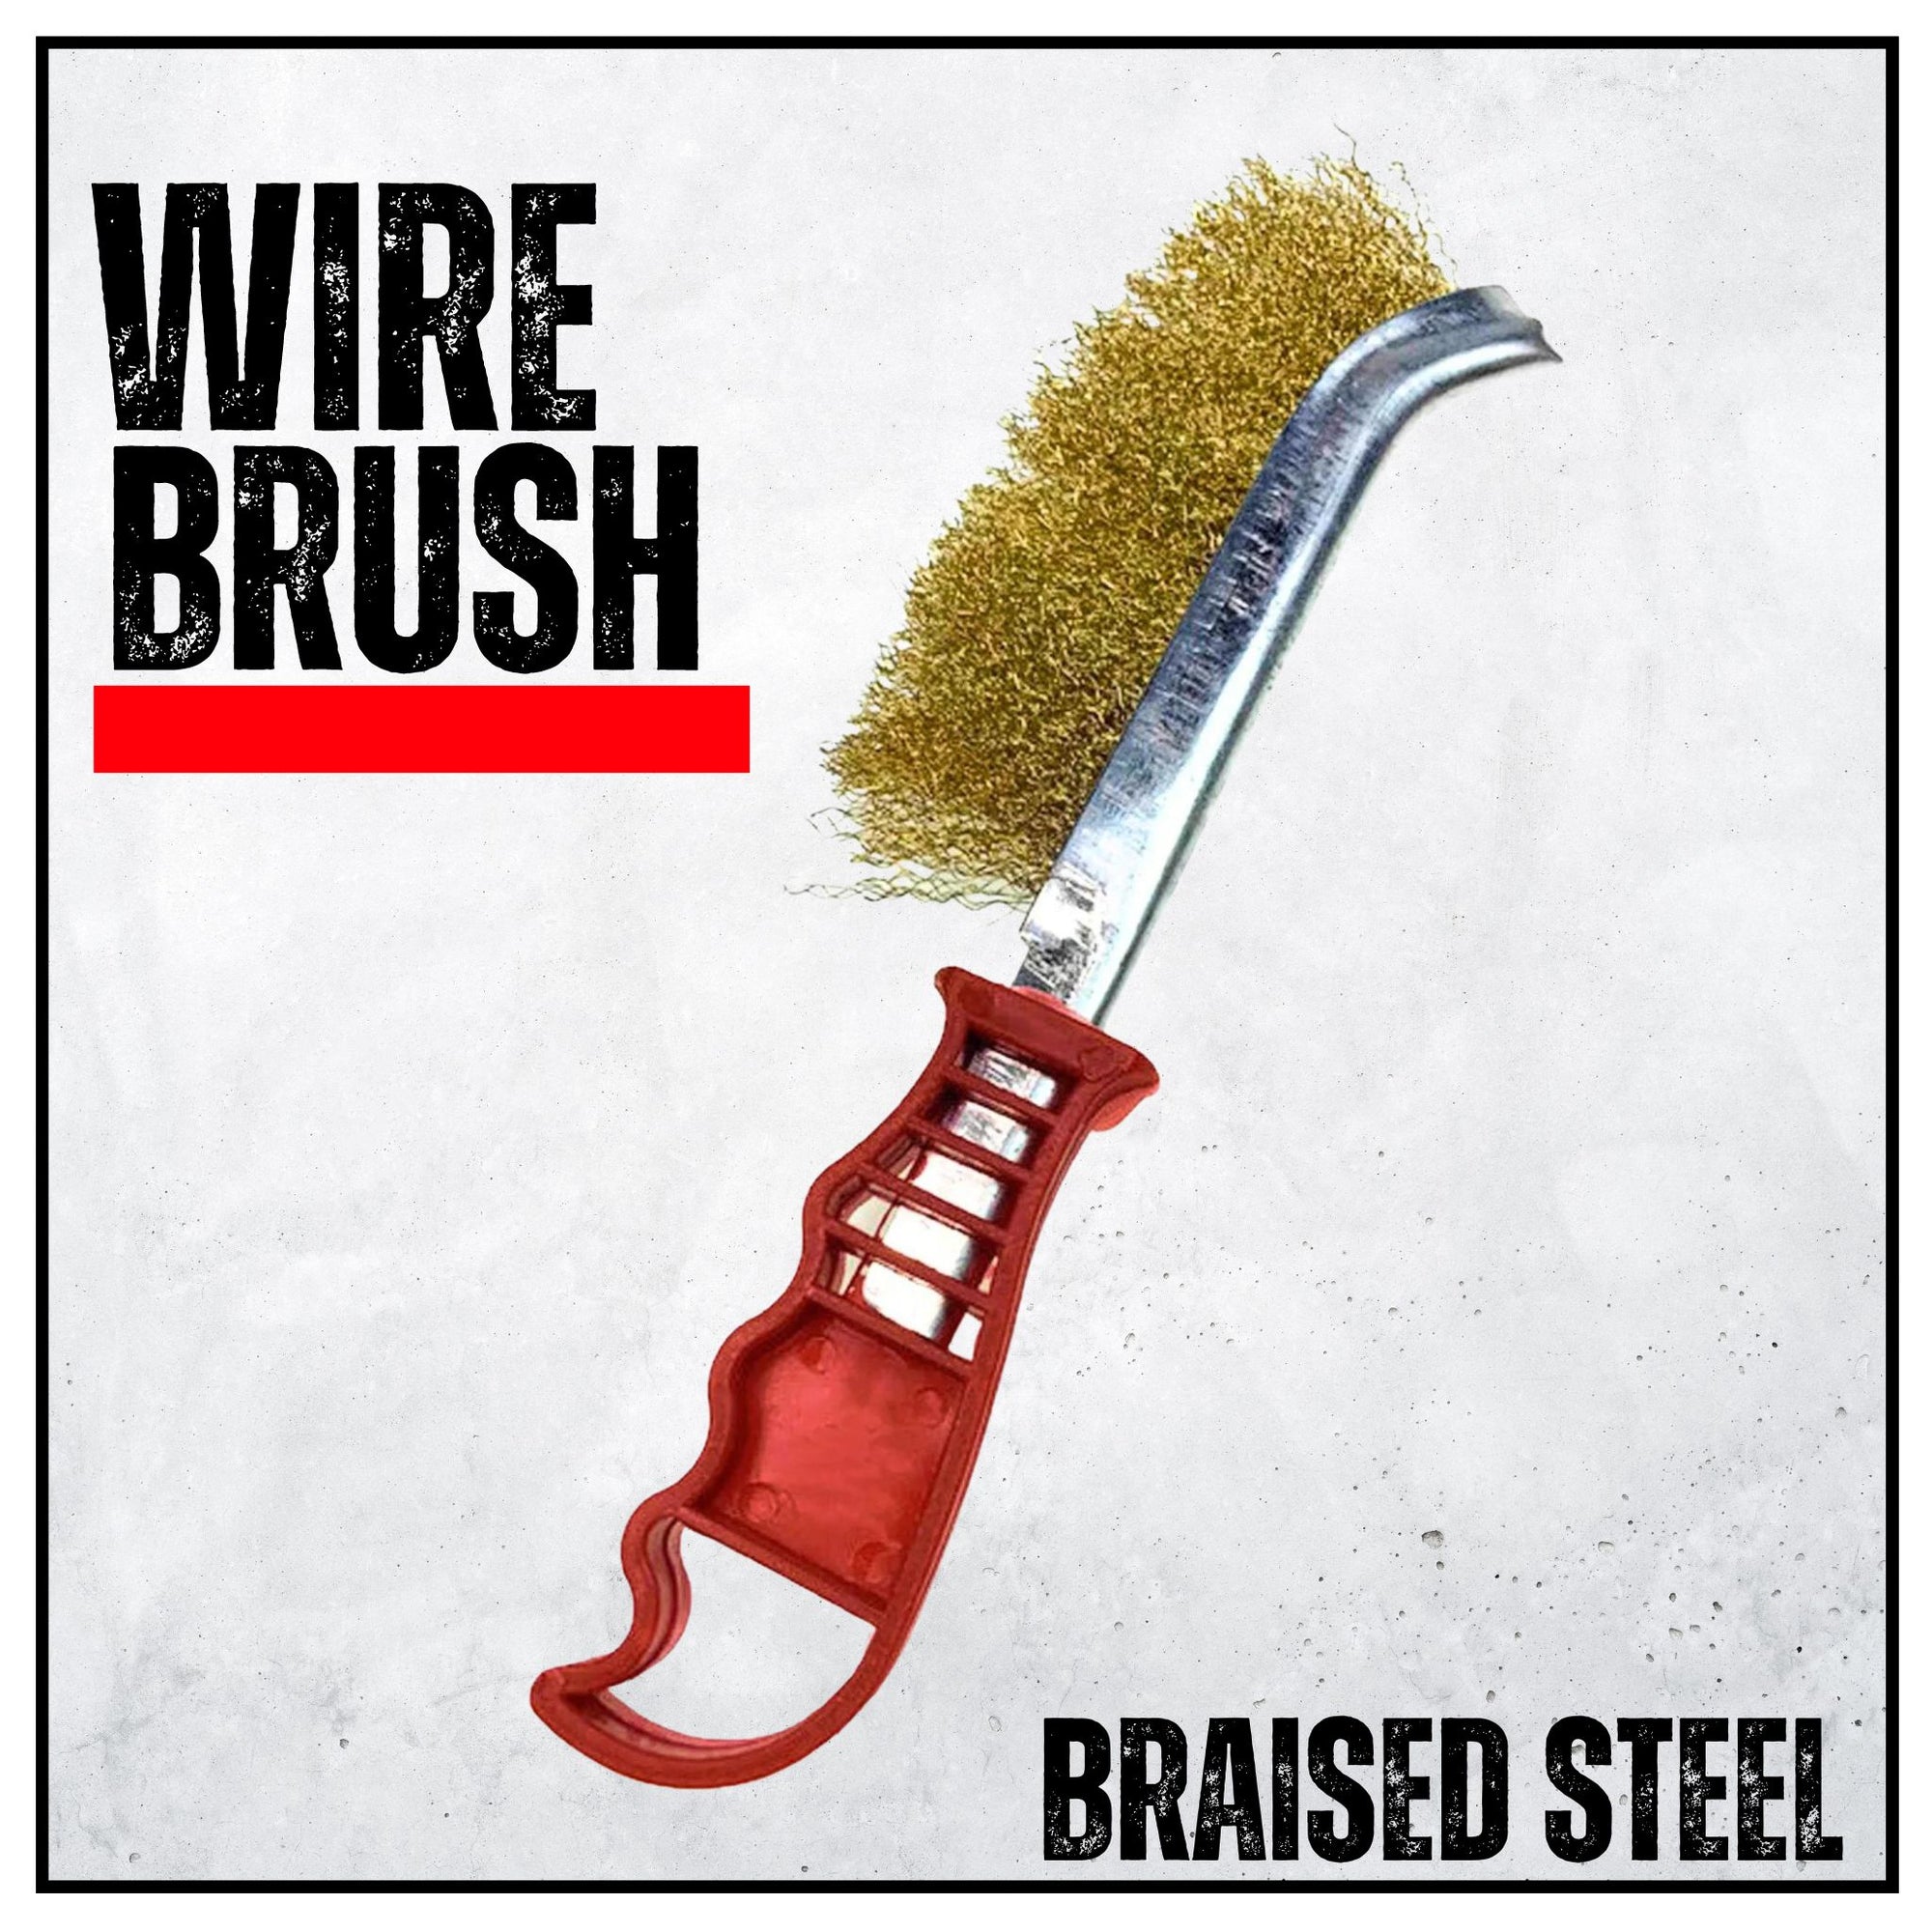 25cm WIRE BRUSH General Purpose Brassed Steel - South East Clearance Centre